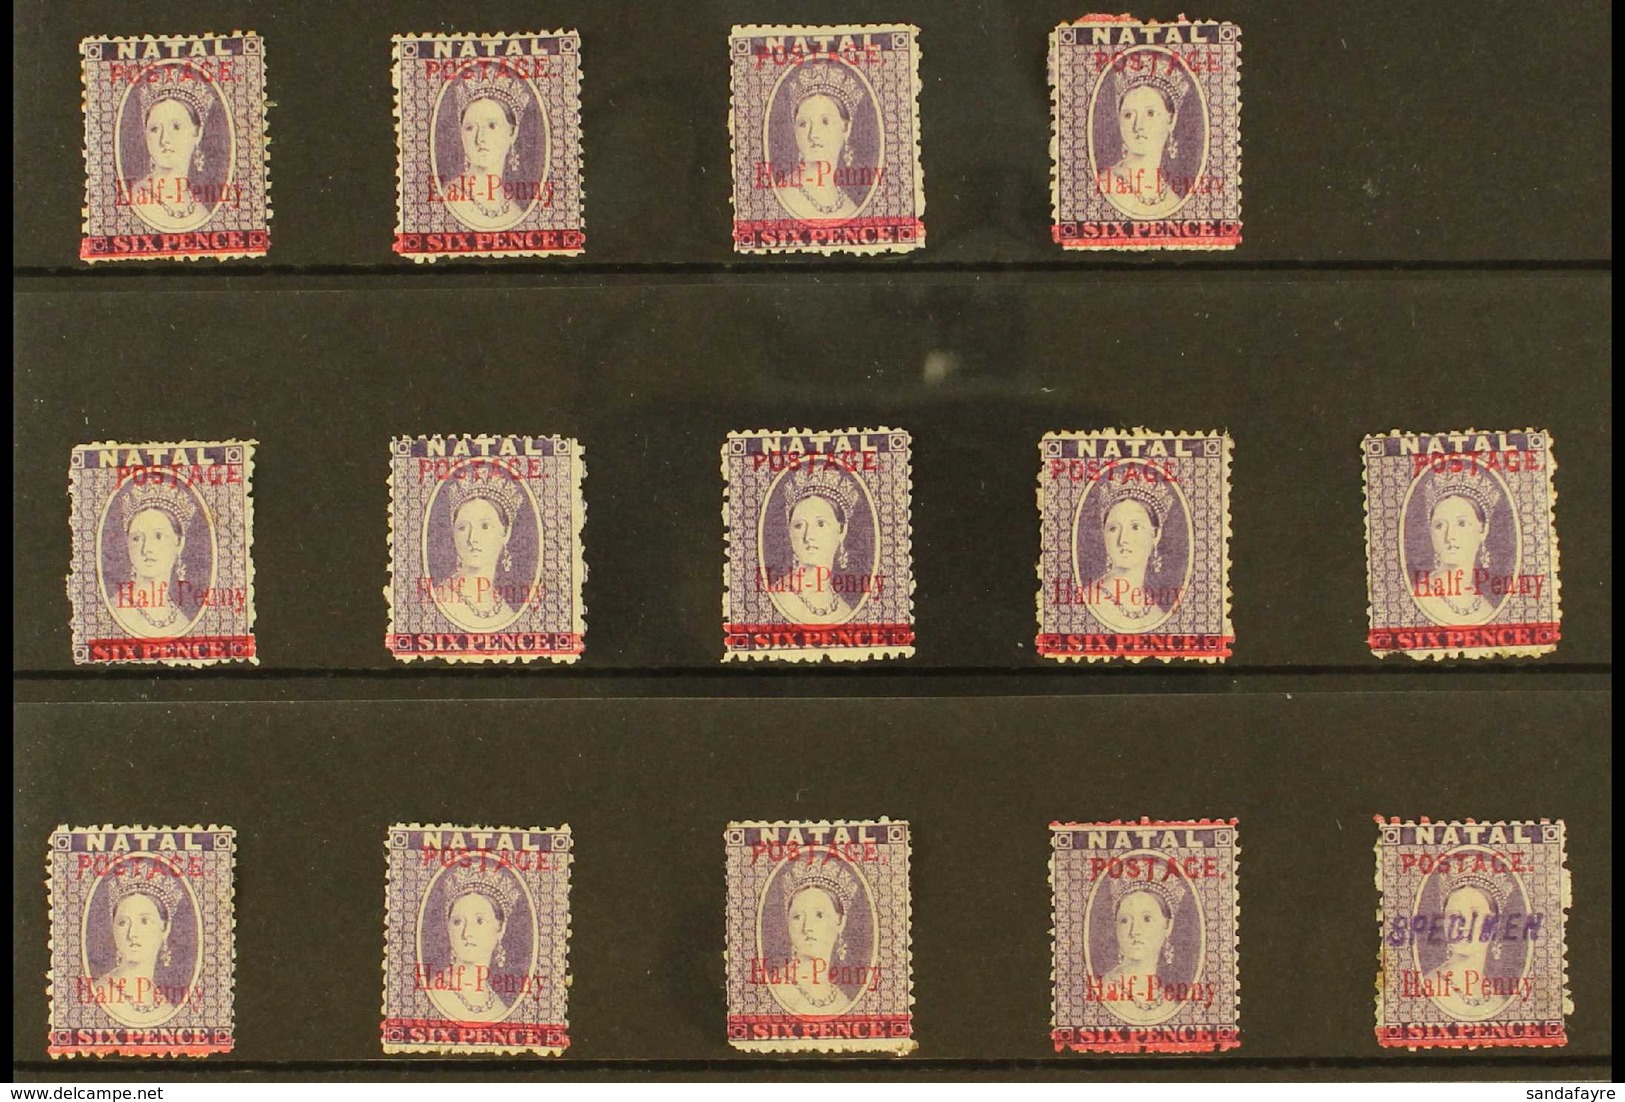 NATAL 1895 MINT SURCHARGED COLLECTION. An All Different Selection Of The ½d On 6d Chalon Issue, A Complete Run Of All Va - Non Classés